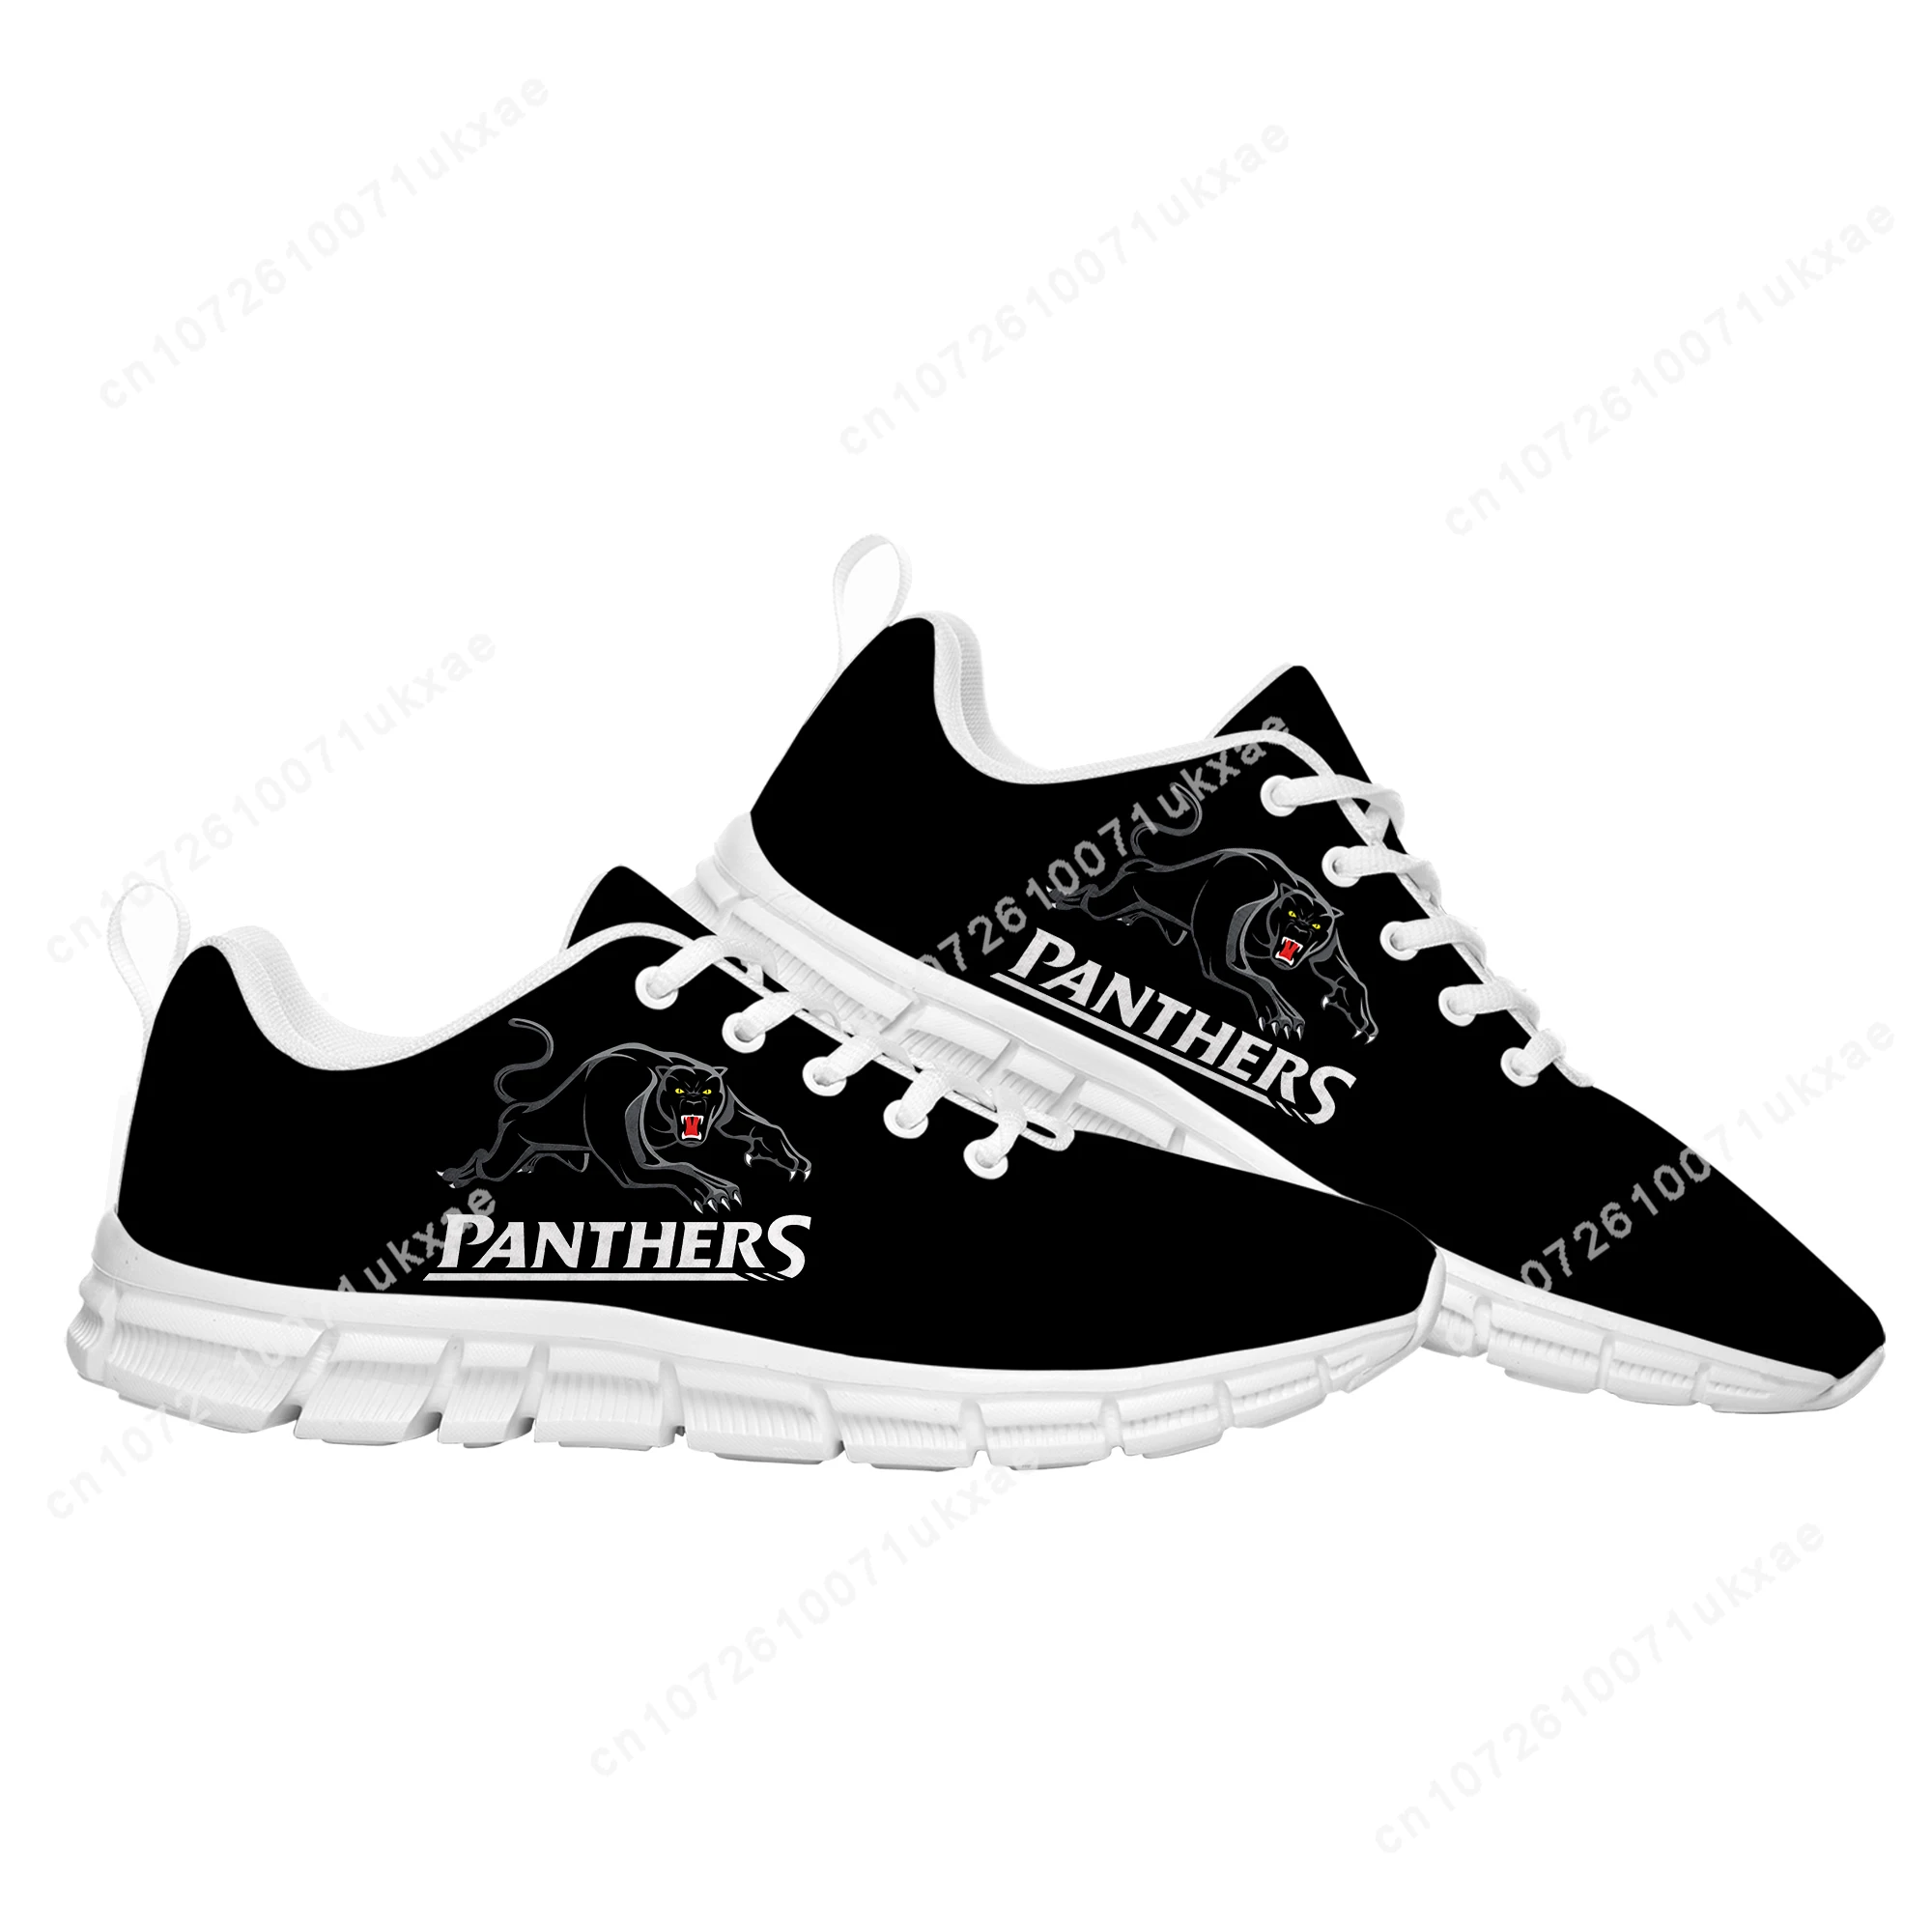 

Penrith Panthers Australian Rugby Sports Shoes Mens Womens Teenager Kids Children Sneakers High Quality Parent Chil DIY Couple